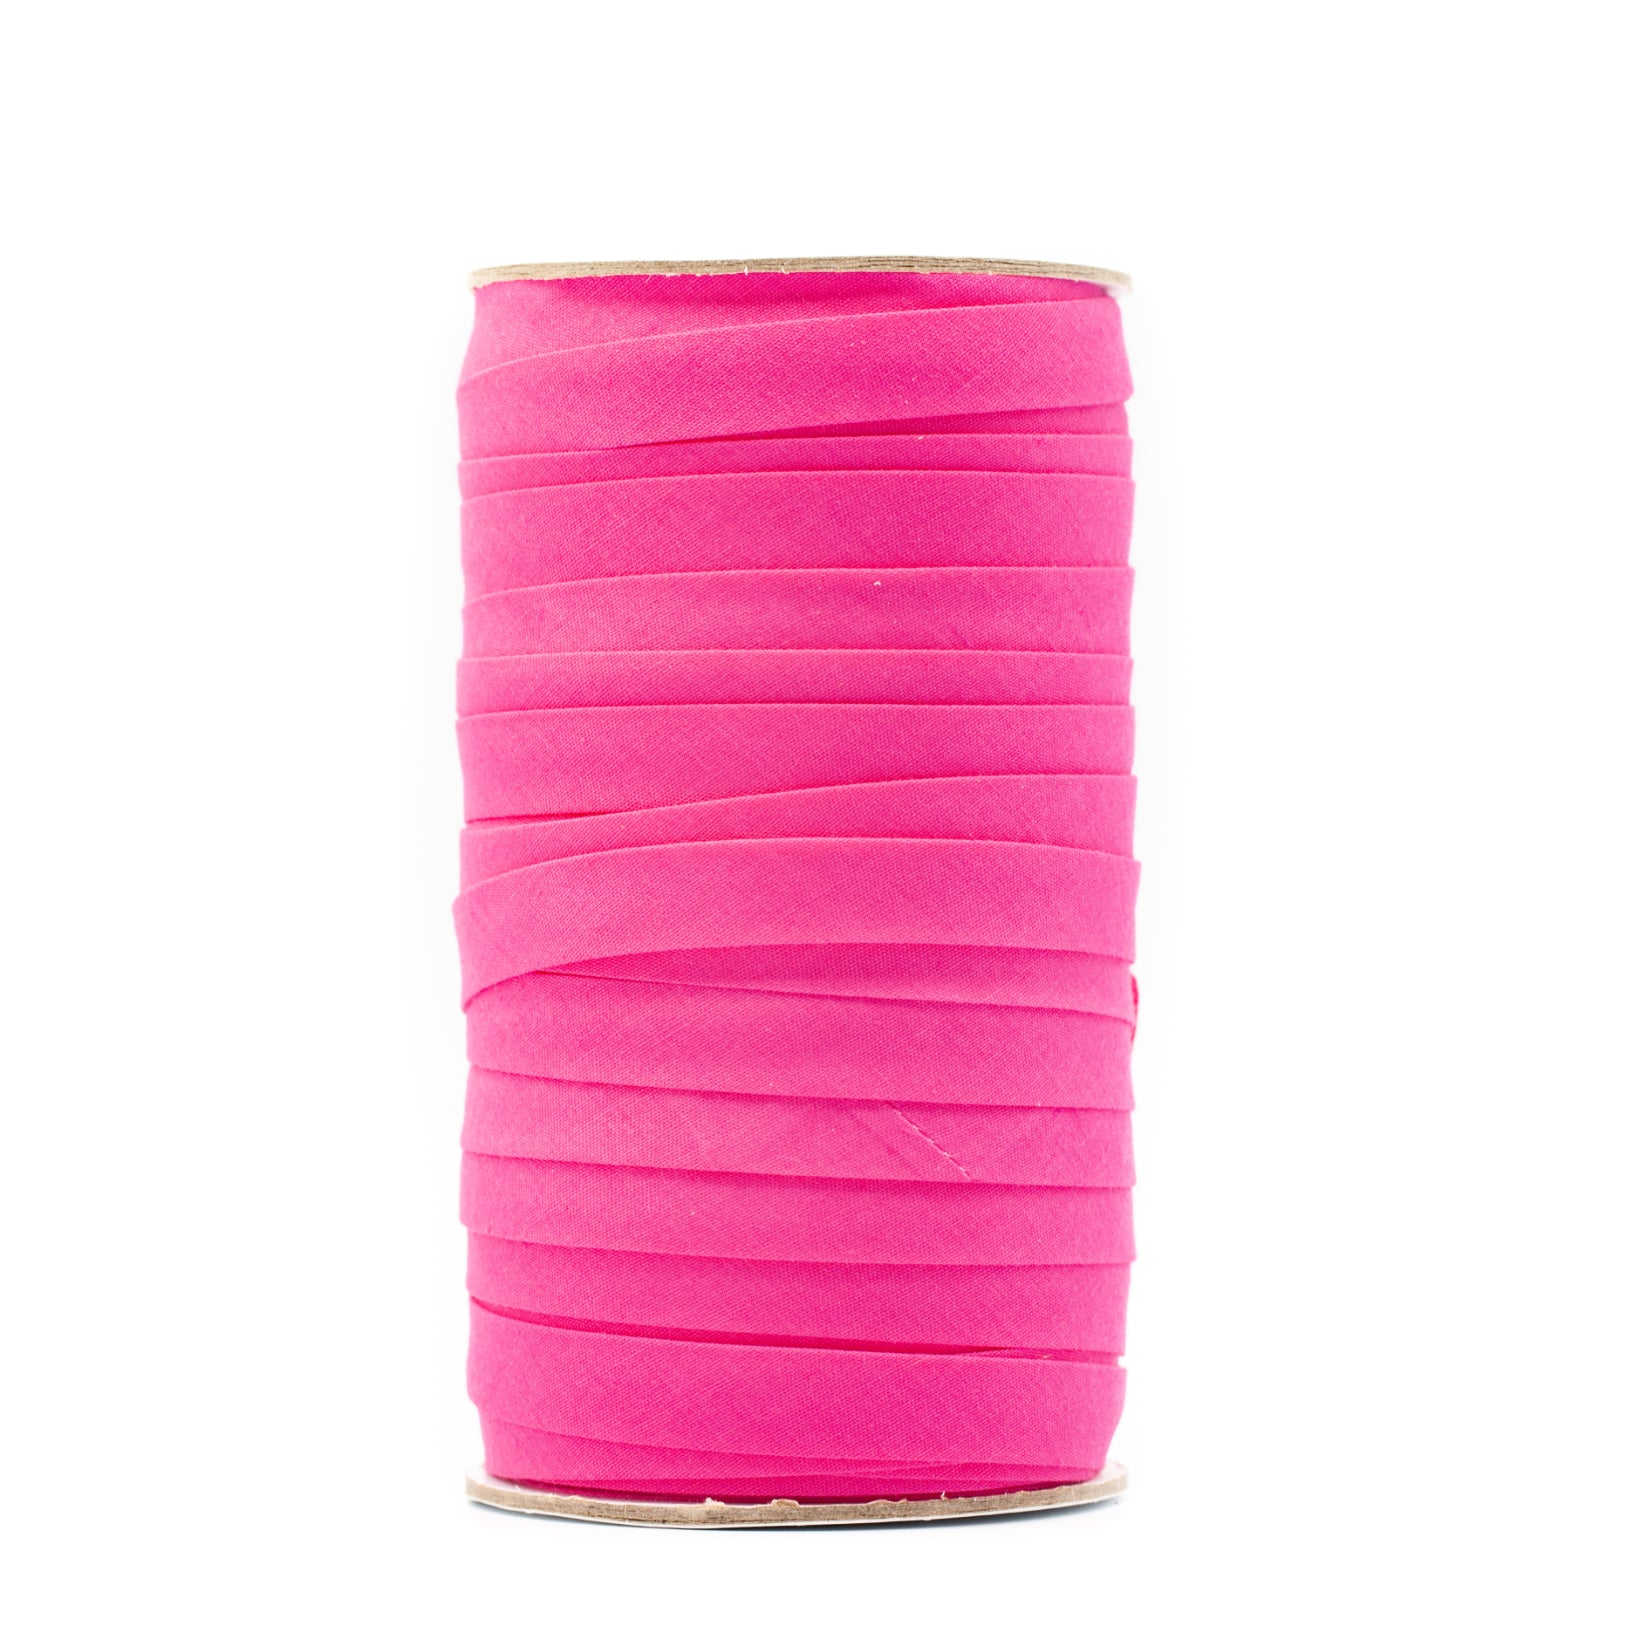 Bias Tape - 13mm - Hot Pink (stand)